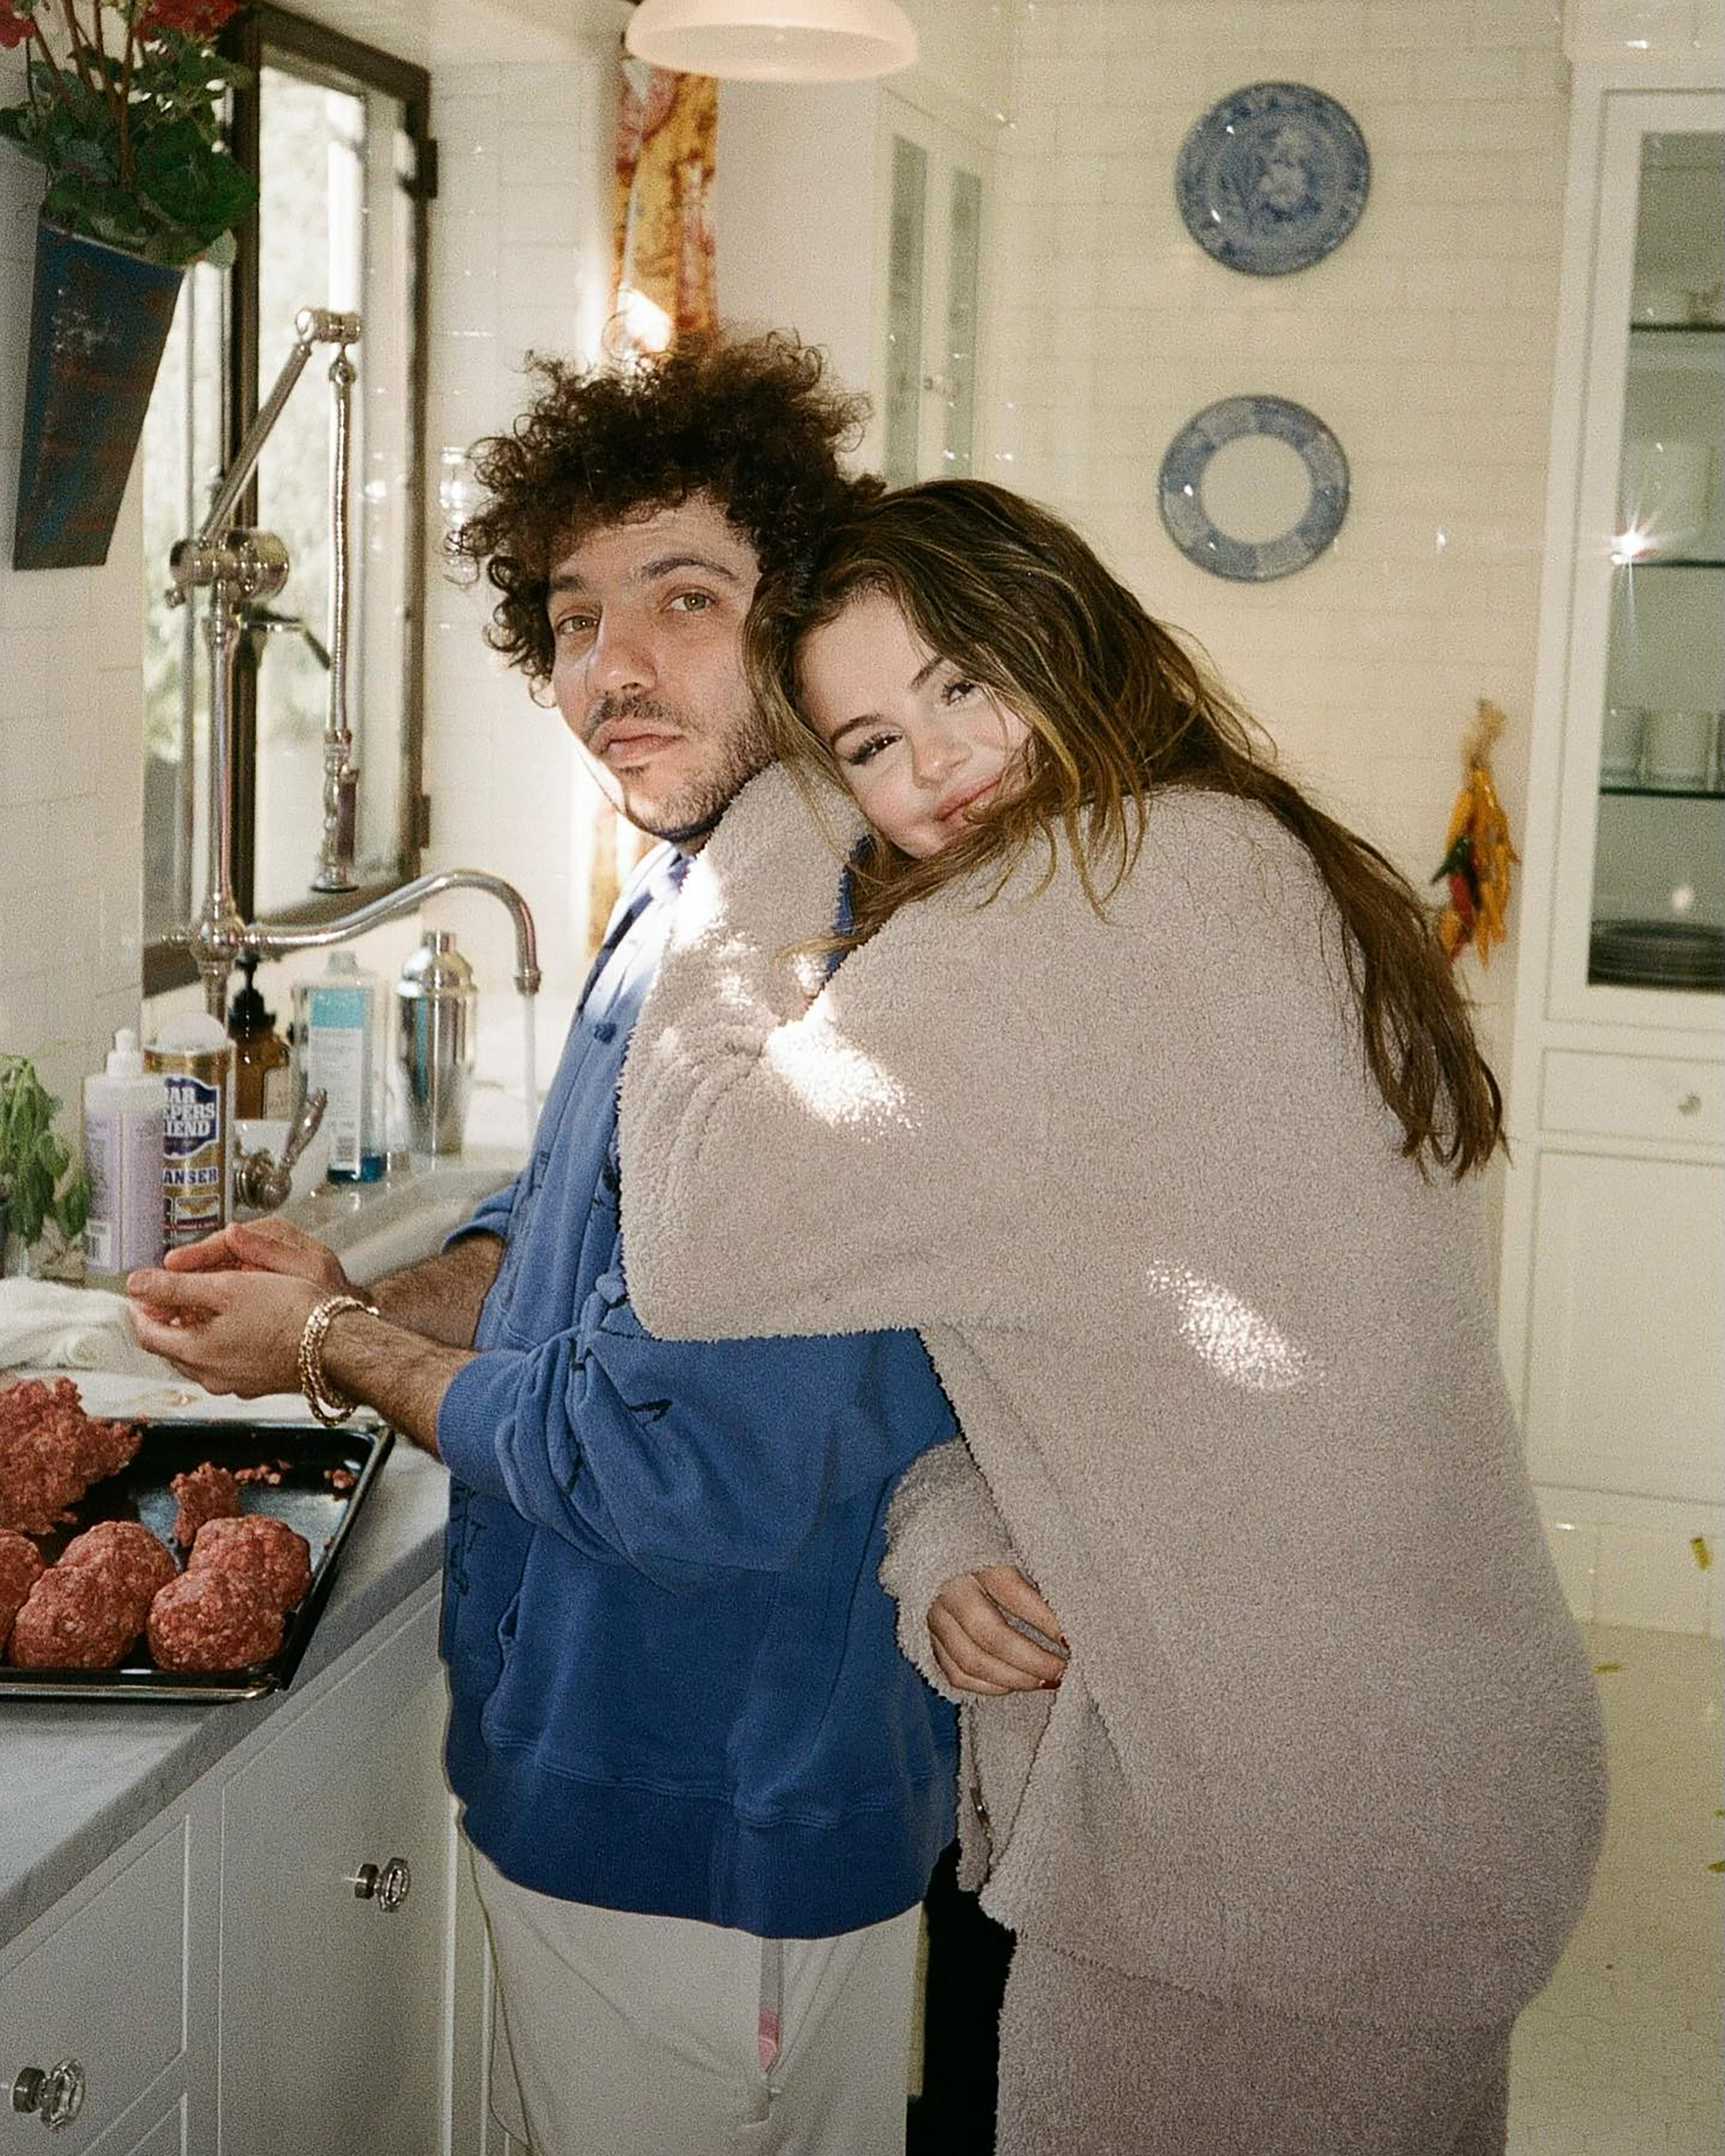 Selena posed with her boyfriend Benny Blanco for a photo in Match 2024